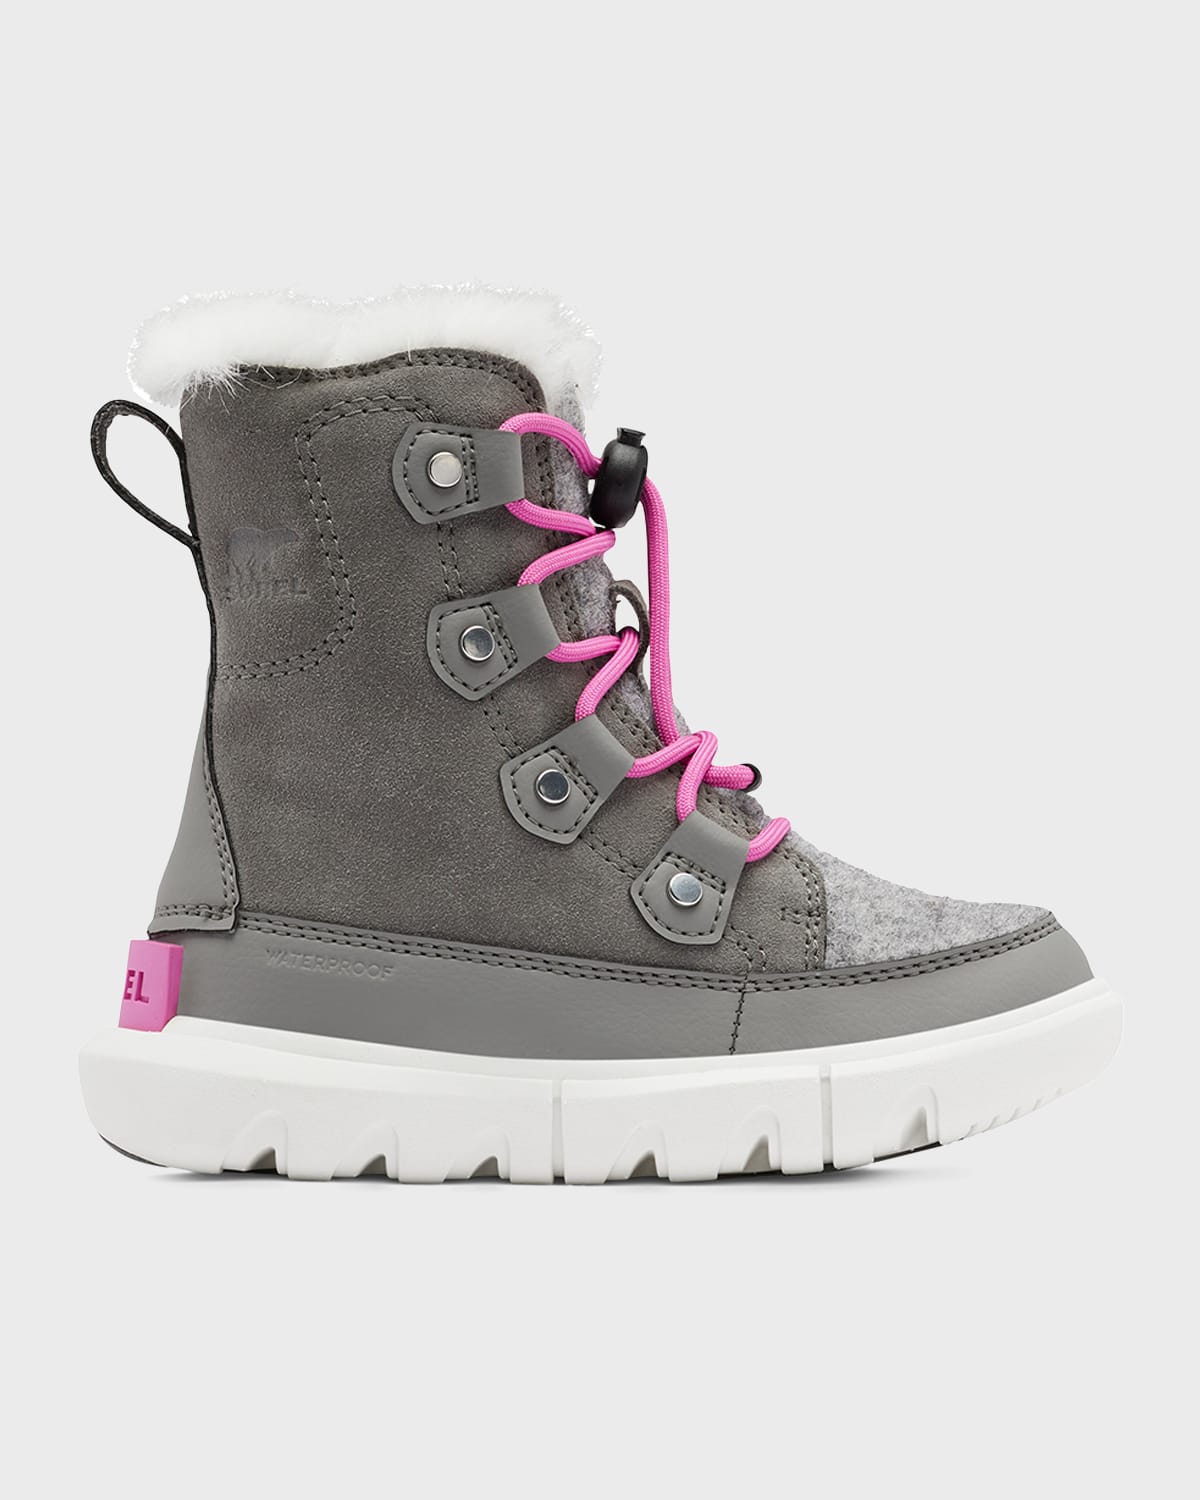 Sorel Kid's Exploder Water-resistant Snow Boots, Toddler/kids In Quarry Bright Lav